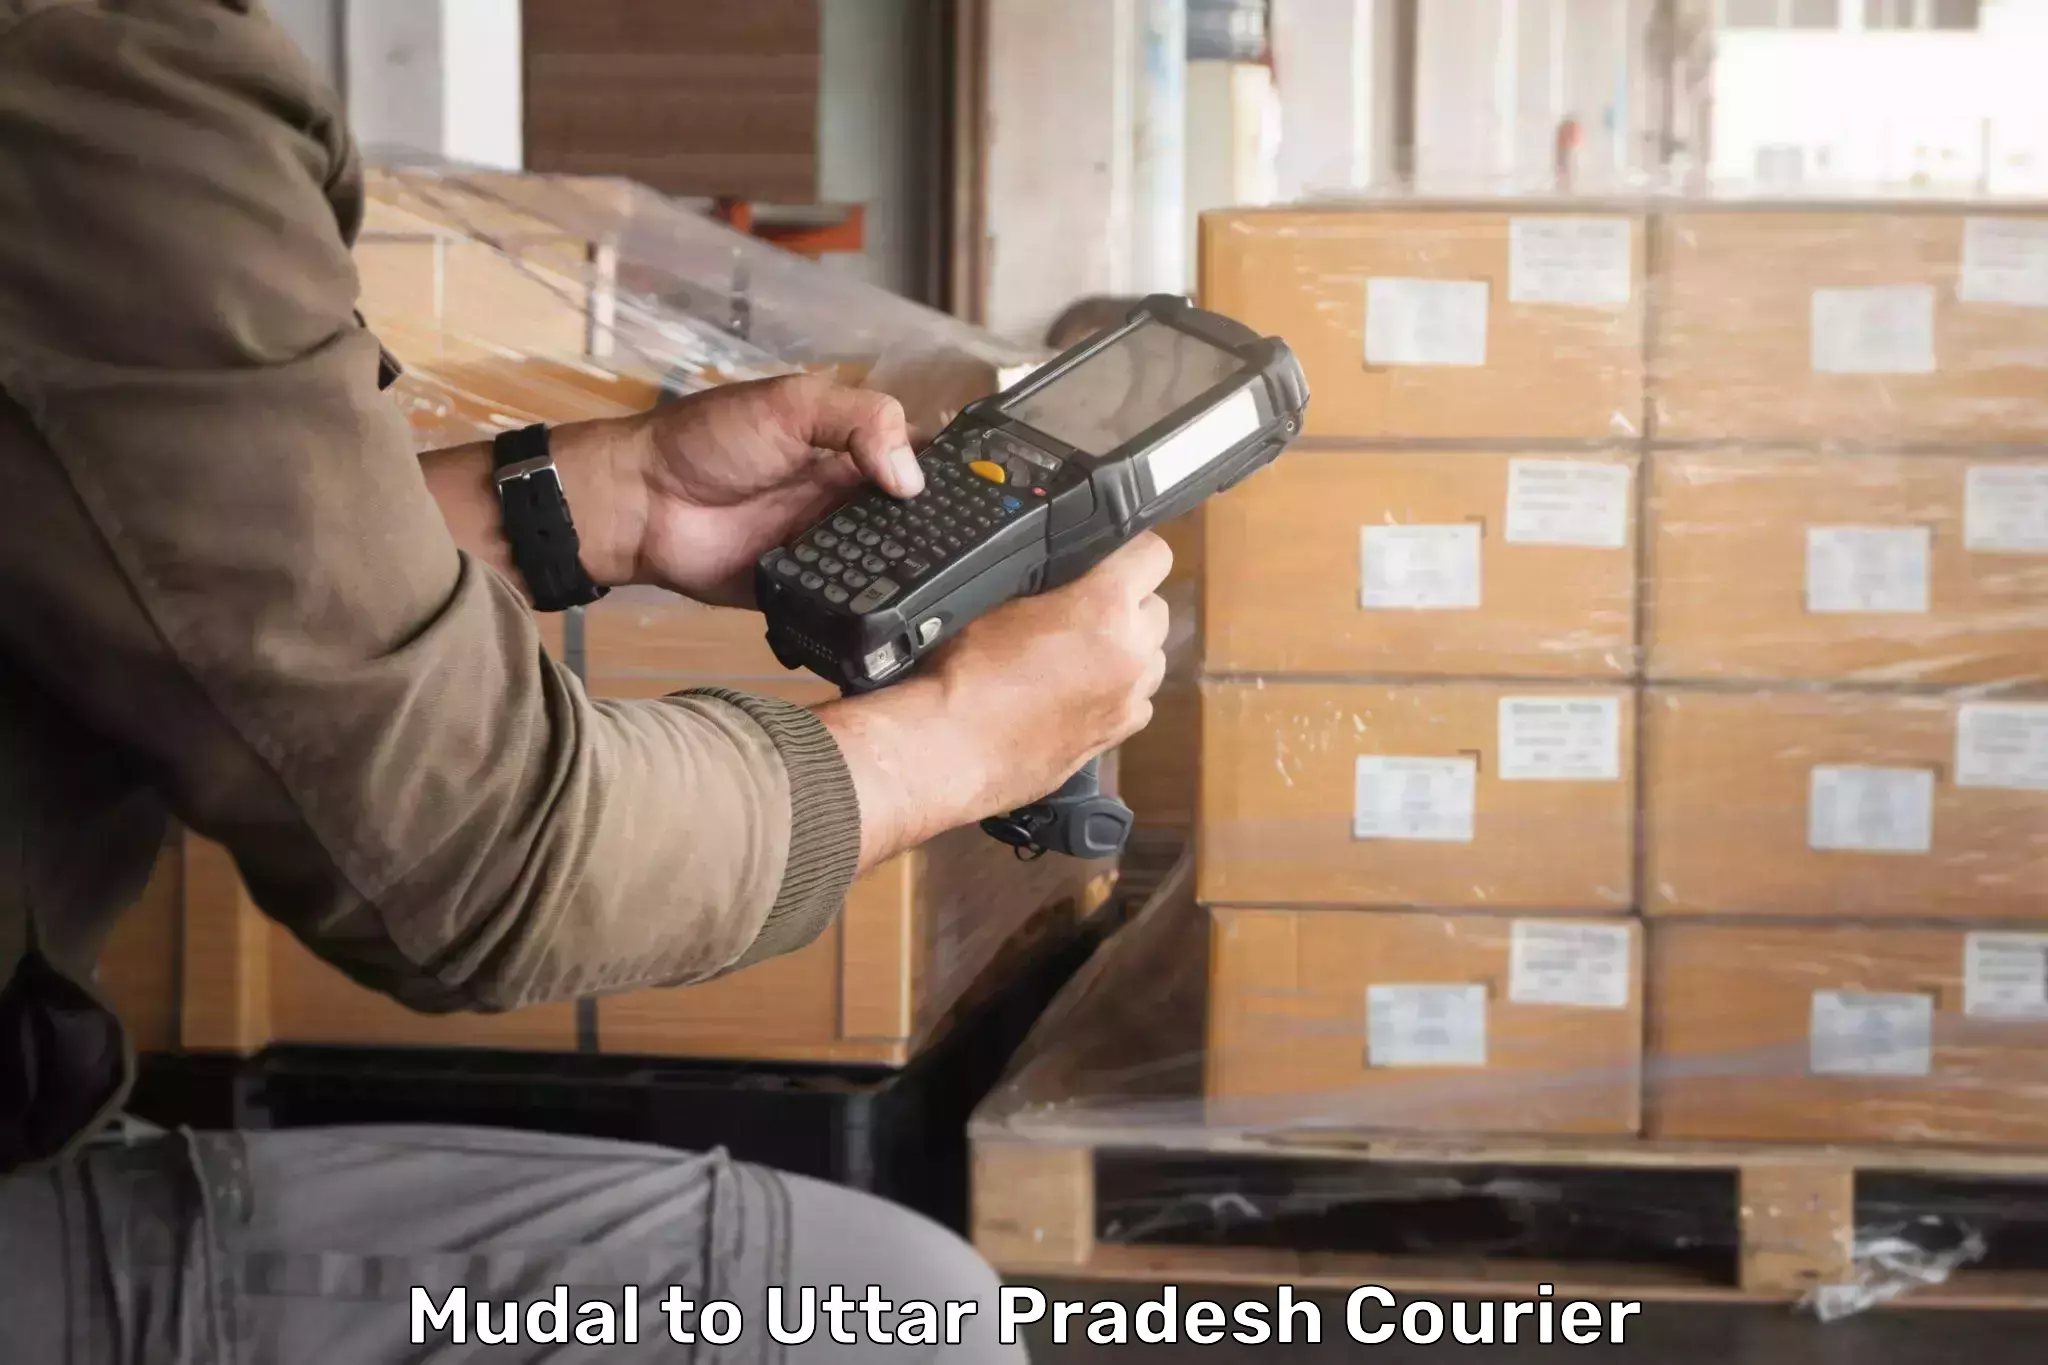 Express delivery solutions Mudal to Fatehabad Agra